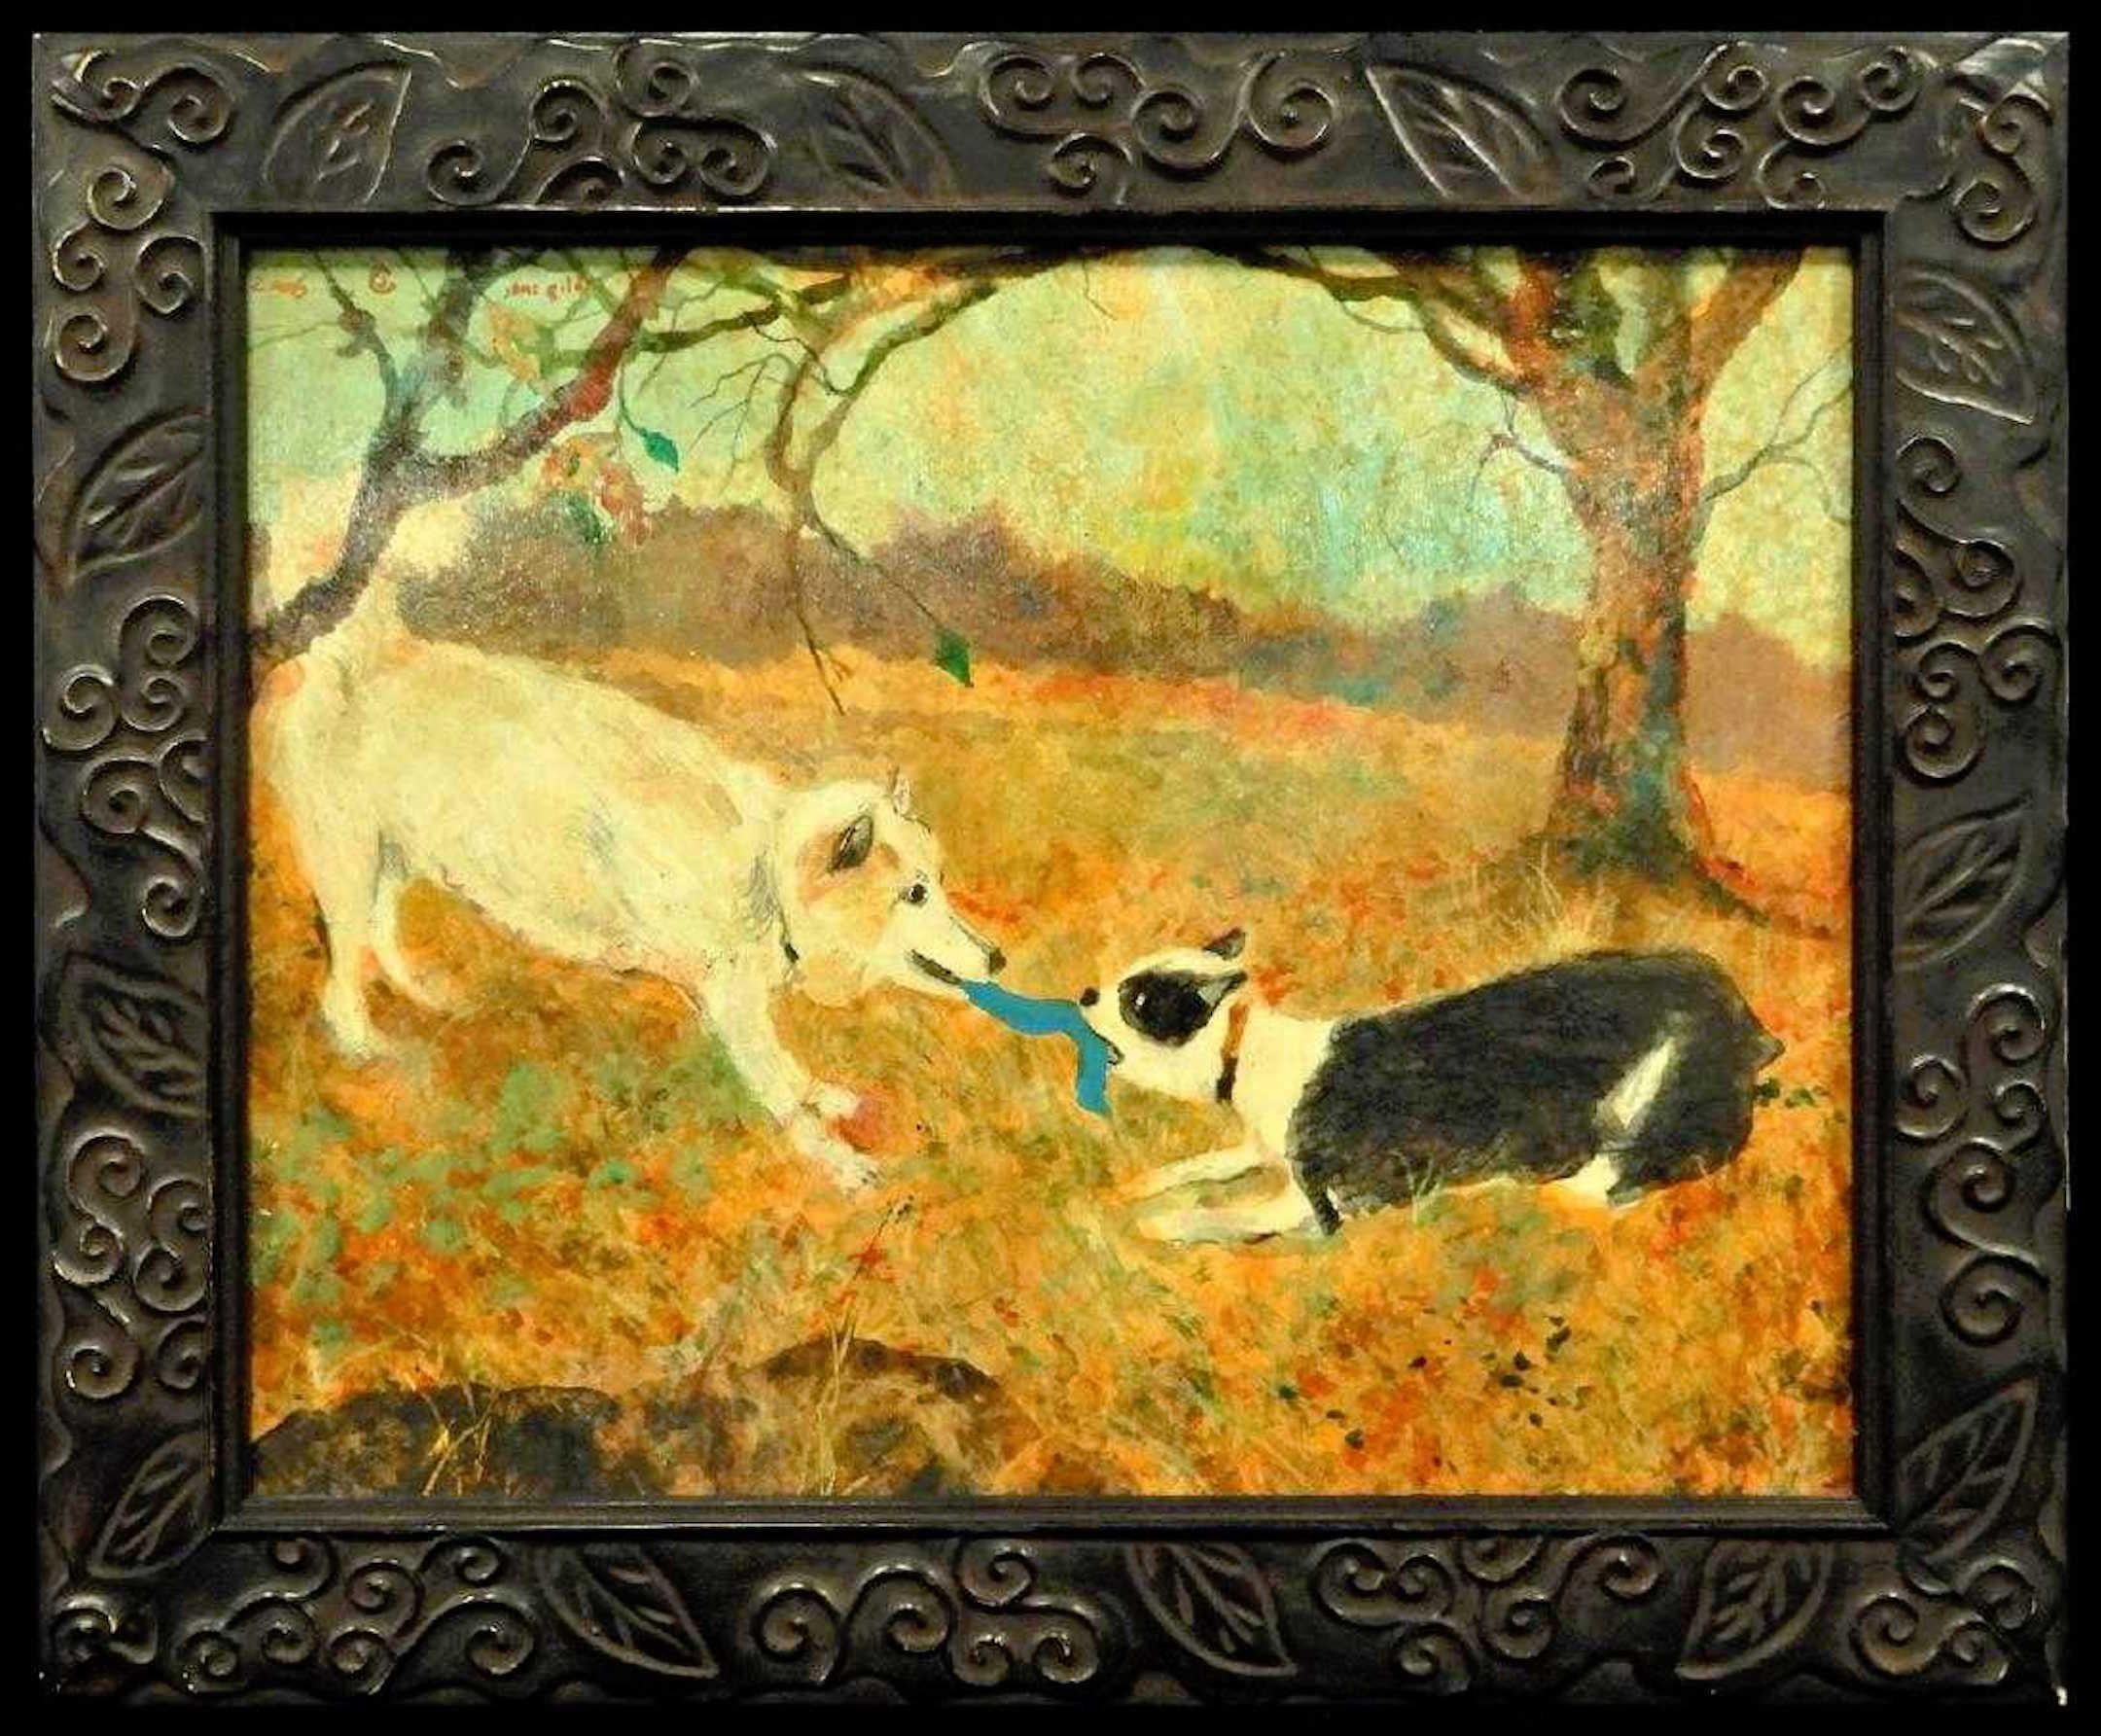 Jane Gilday, dogs in landscape, 2006
Oil on board
signed and dated upper left
sight size 13 1/2